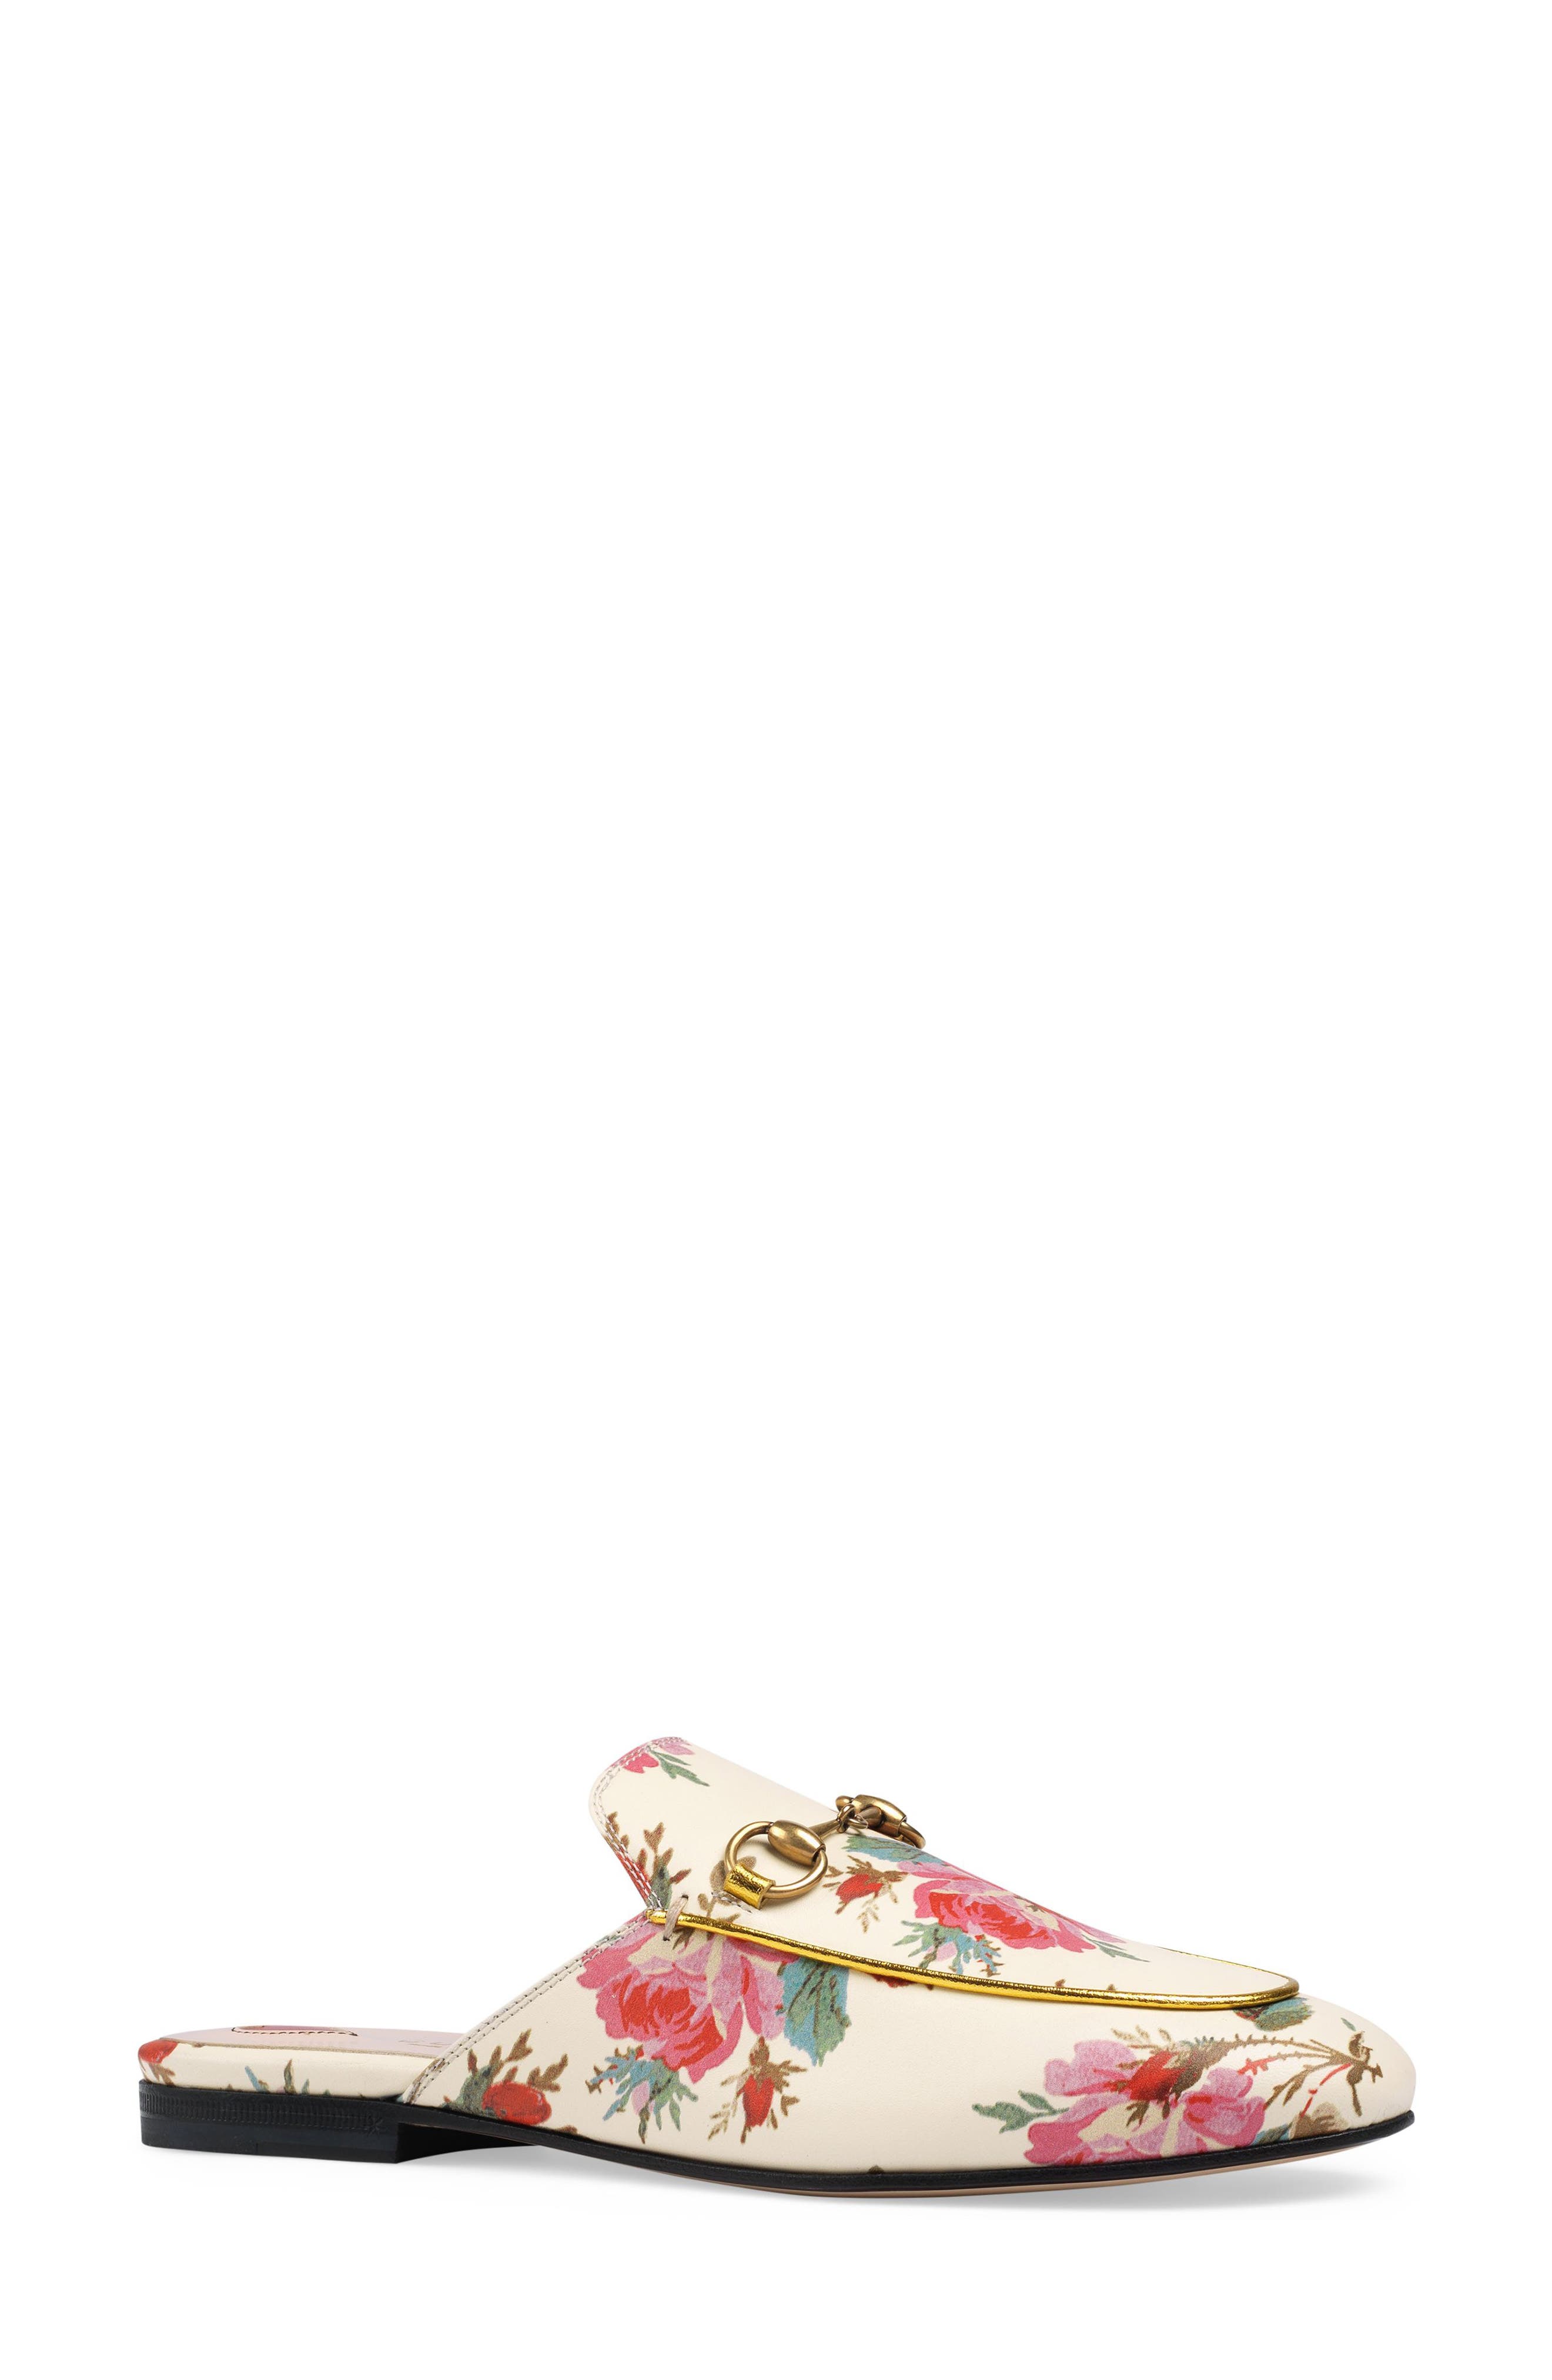 gucci princetown floral mules